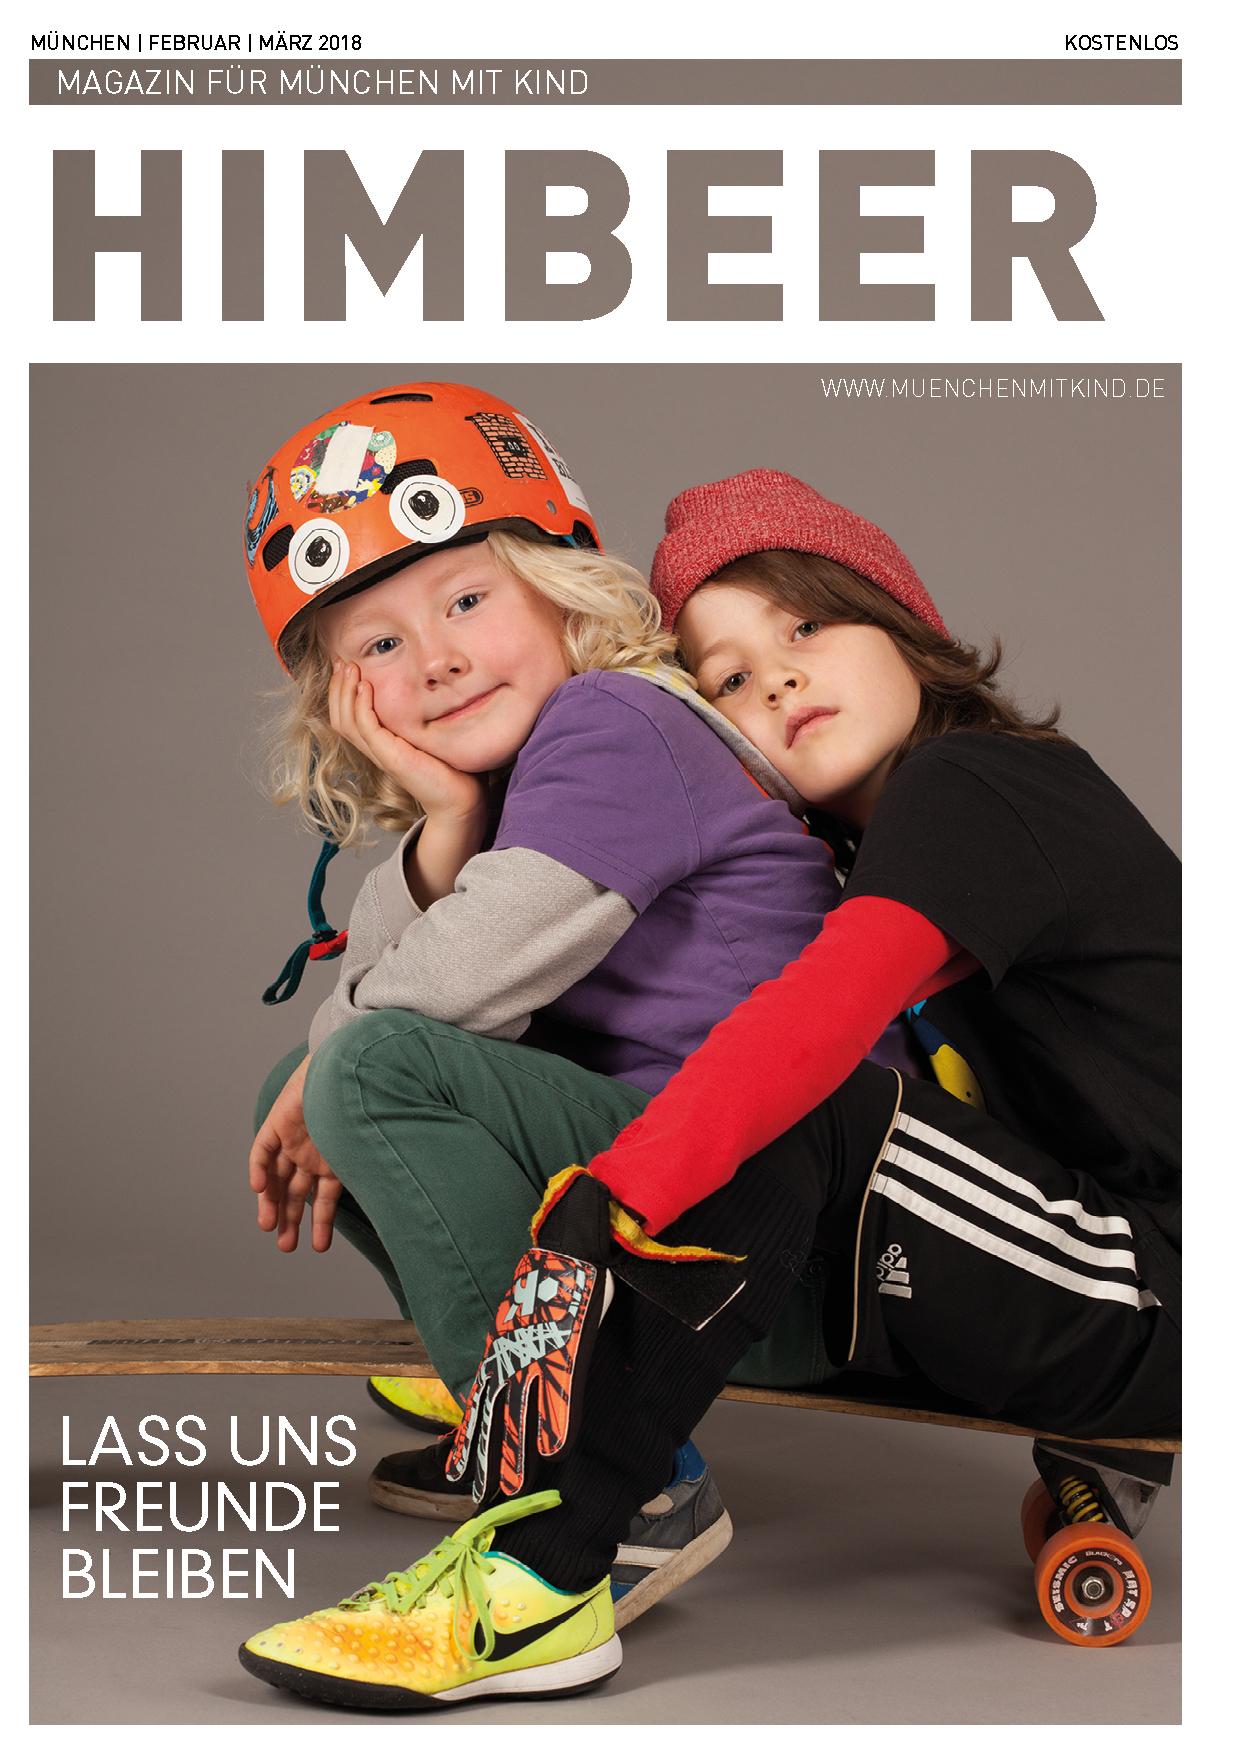 HIMBEER36 MUC Cover